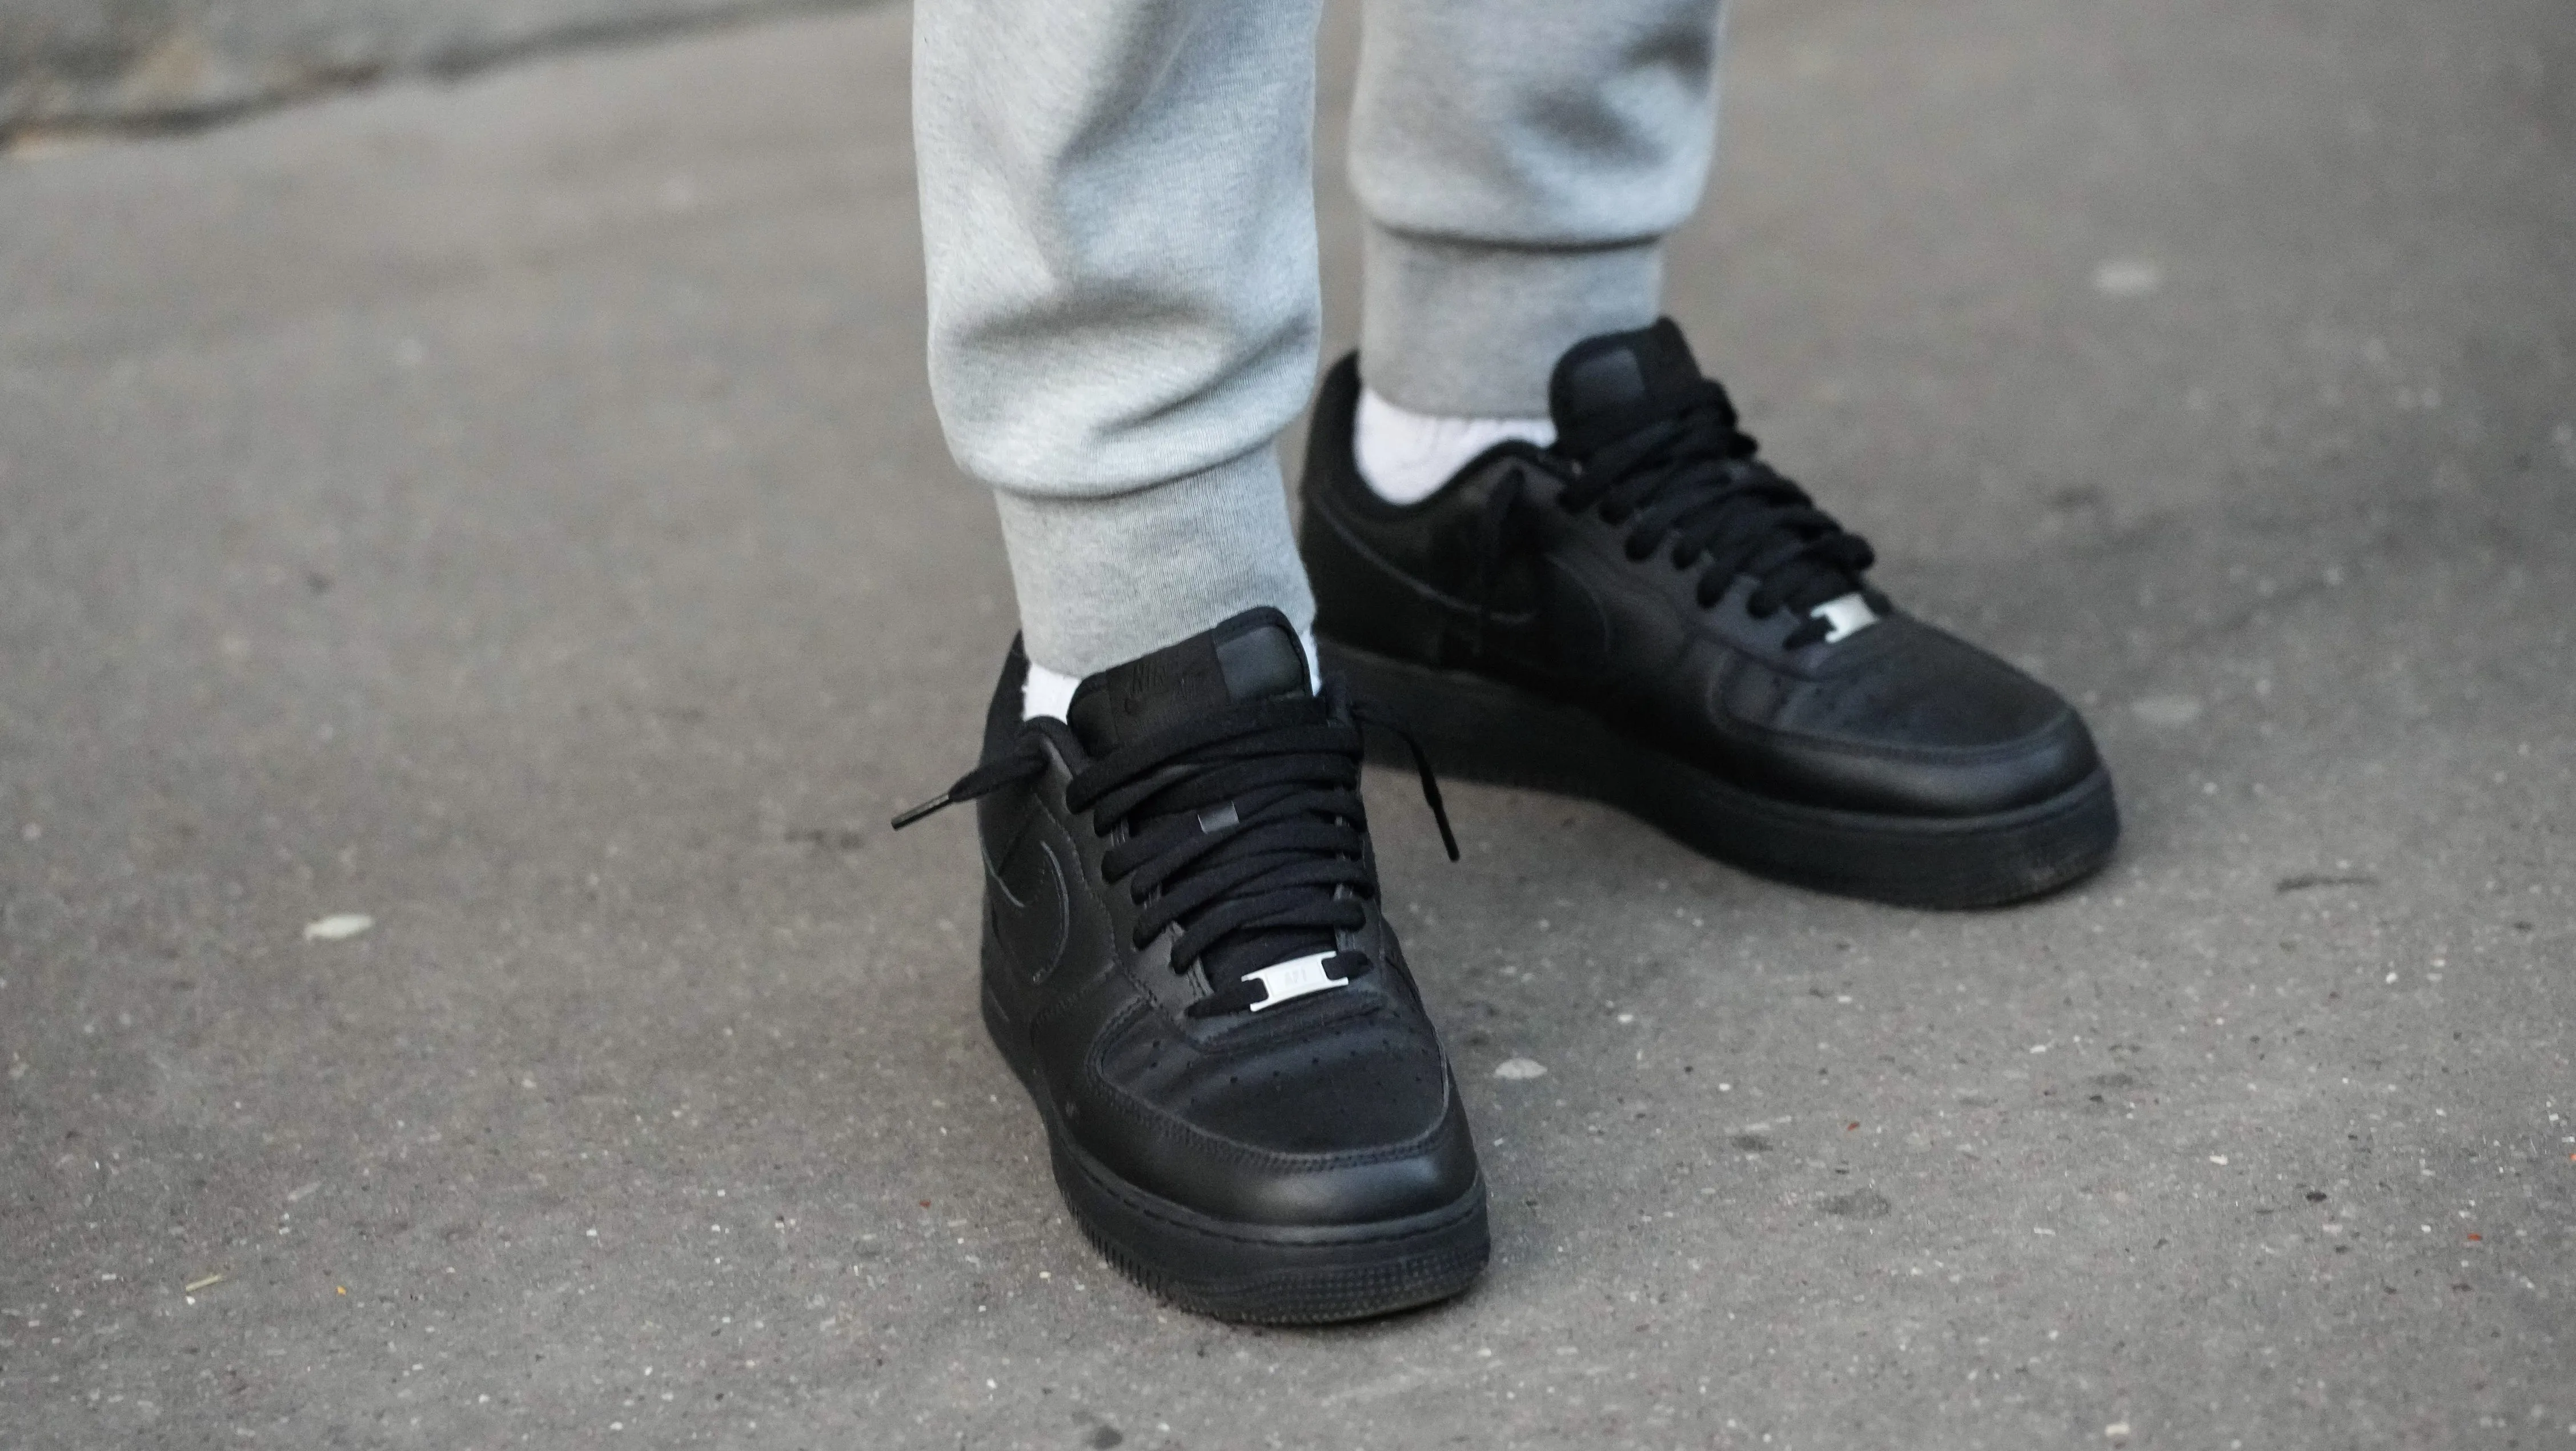 In defense of the triple-black Nike Air Force 1, a shoe whose